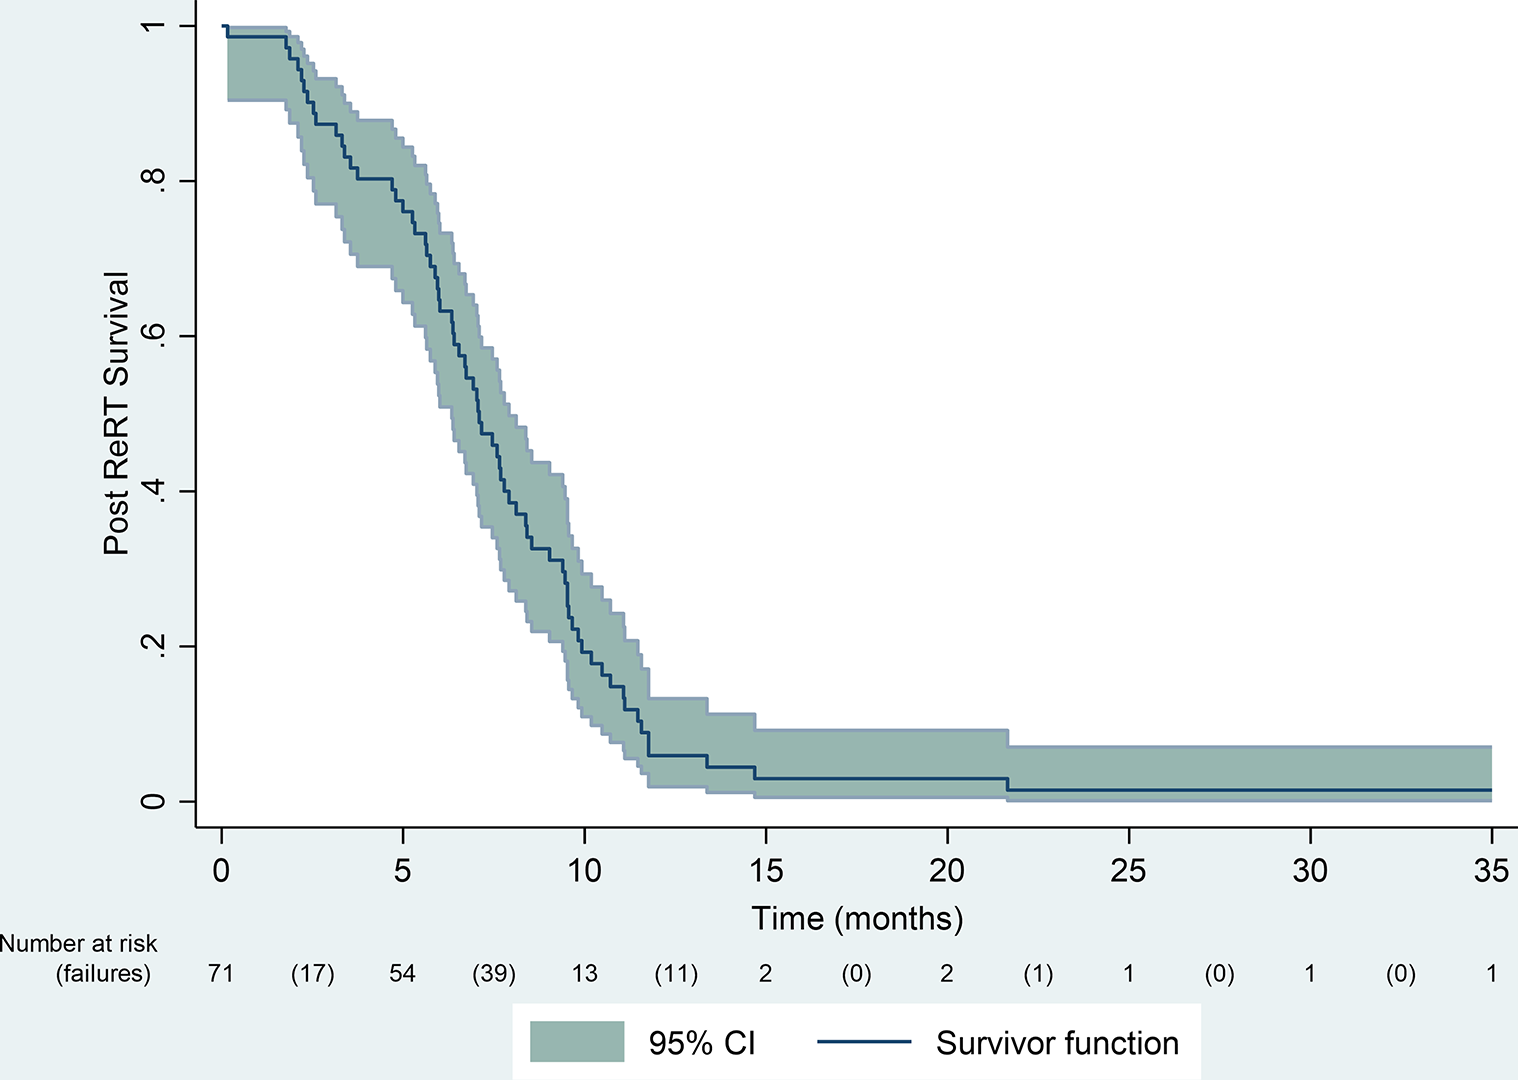 Hypofractionated re-irradiation with bevacizumab for relapsed chemorefractory glioblastoma after prior high dose radiotherapy: a feasible option for patients with large-volume relapse